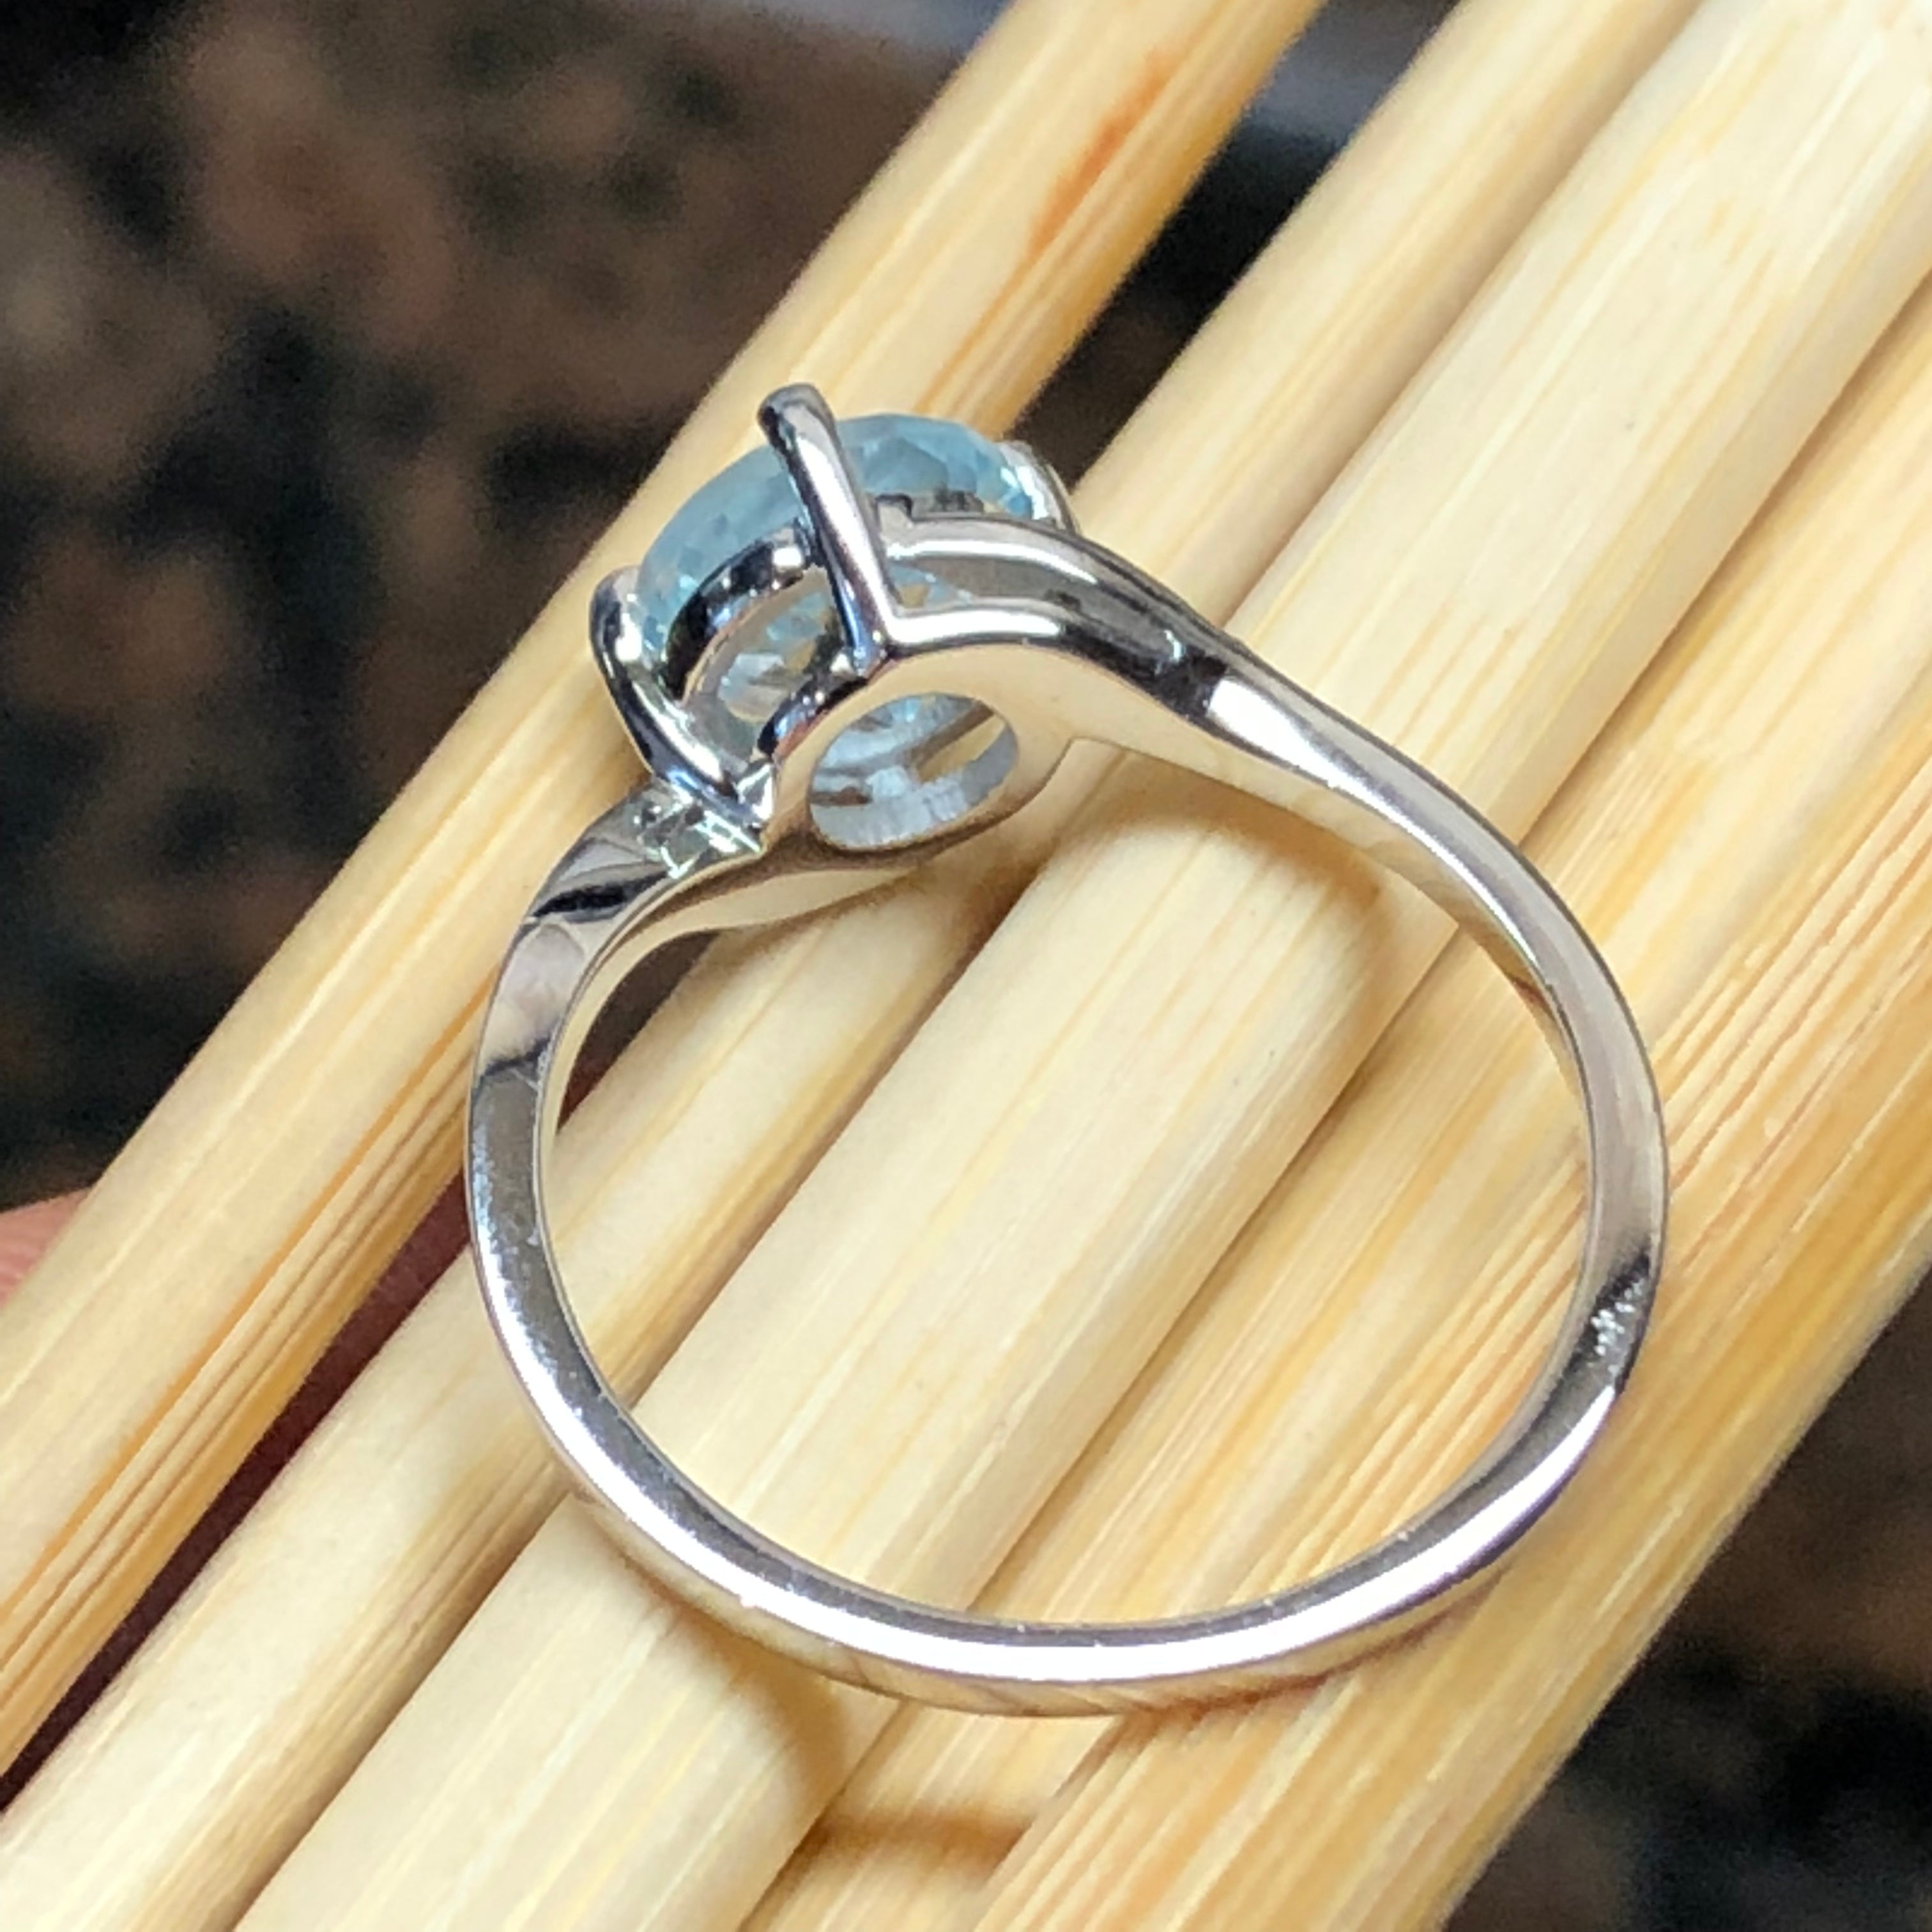 Natural 1ct Blue Topaz, White Topaz 925 Solid Sterling Silver Engagement Ring Size 6, 7, 8, 9 - Natural Rocks by Kala